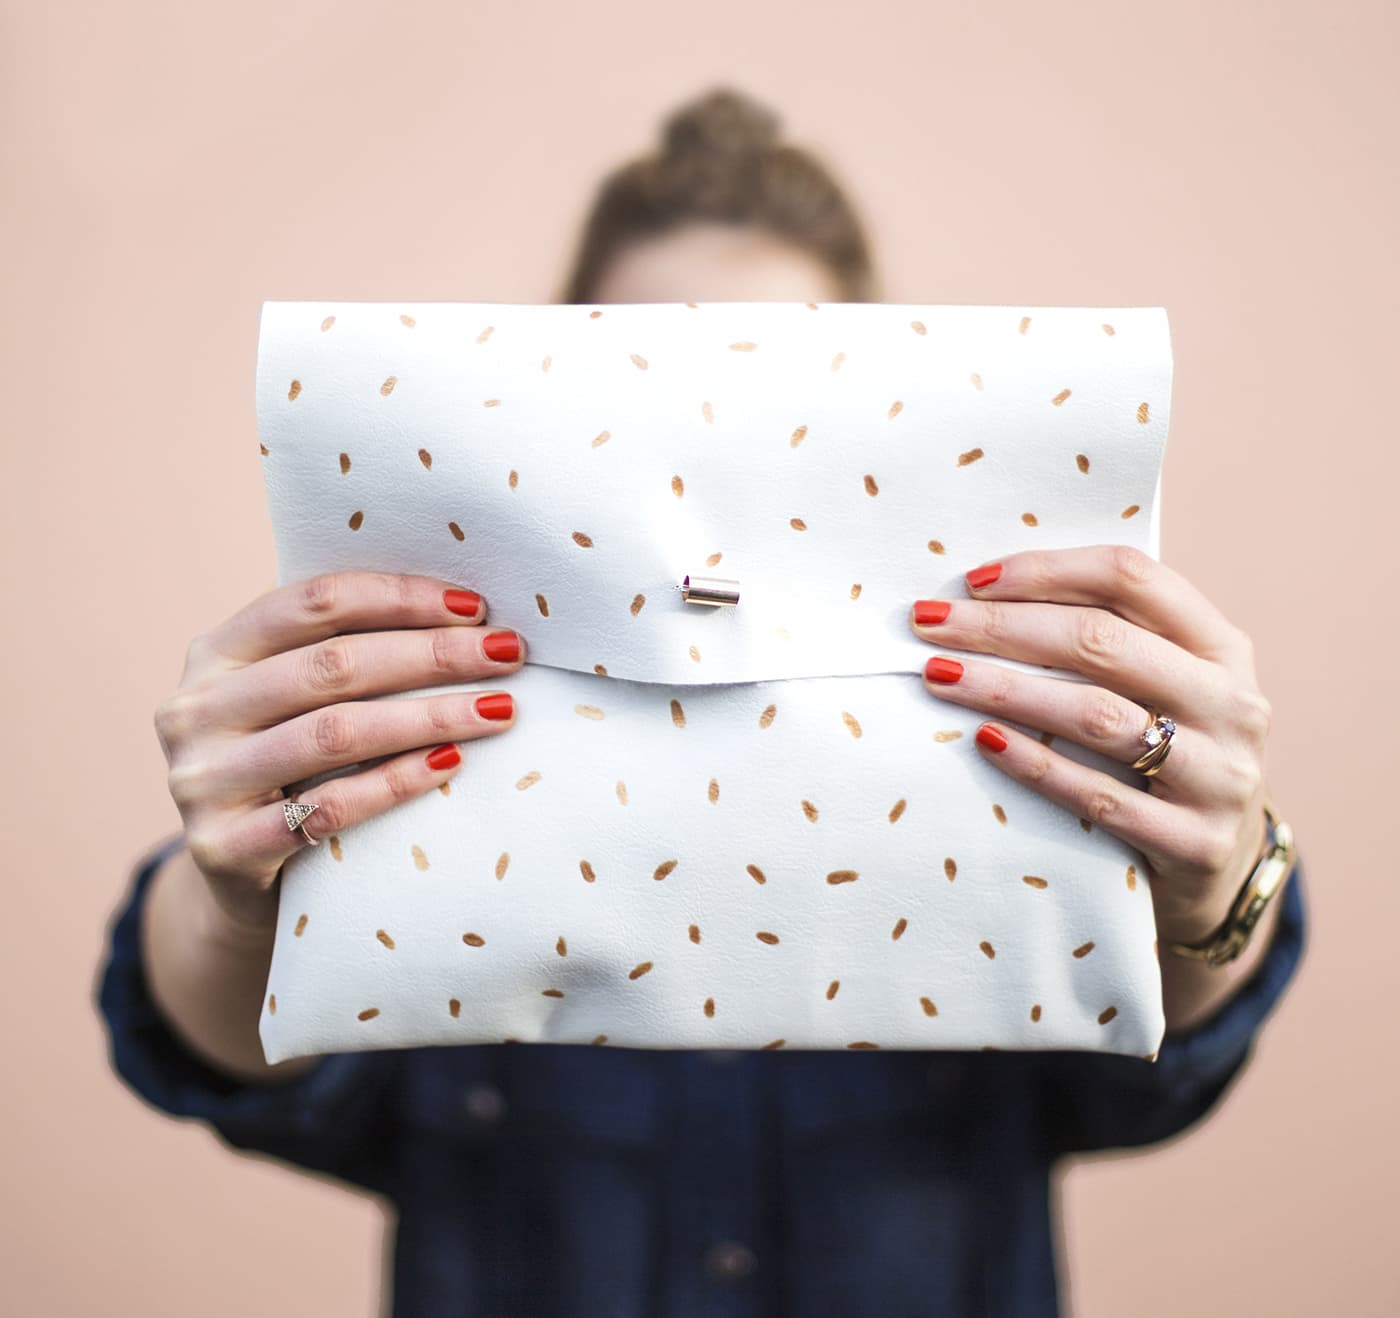 How To Make An Easy Envelope Clutch - YouTube